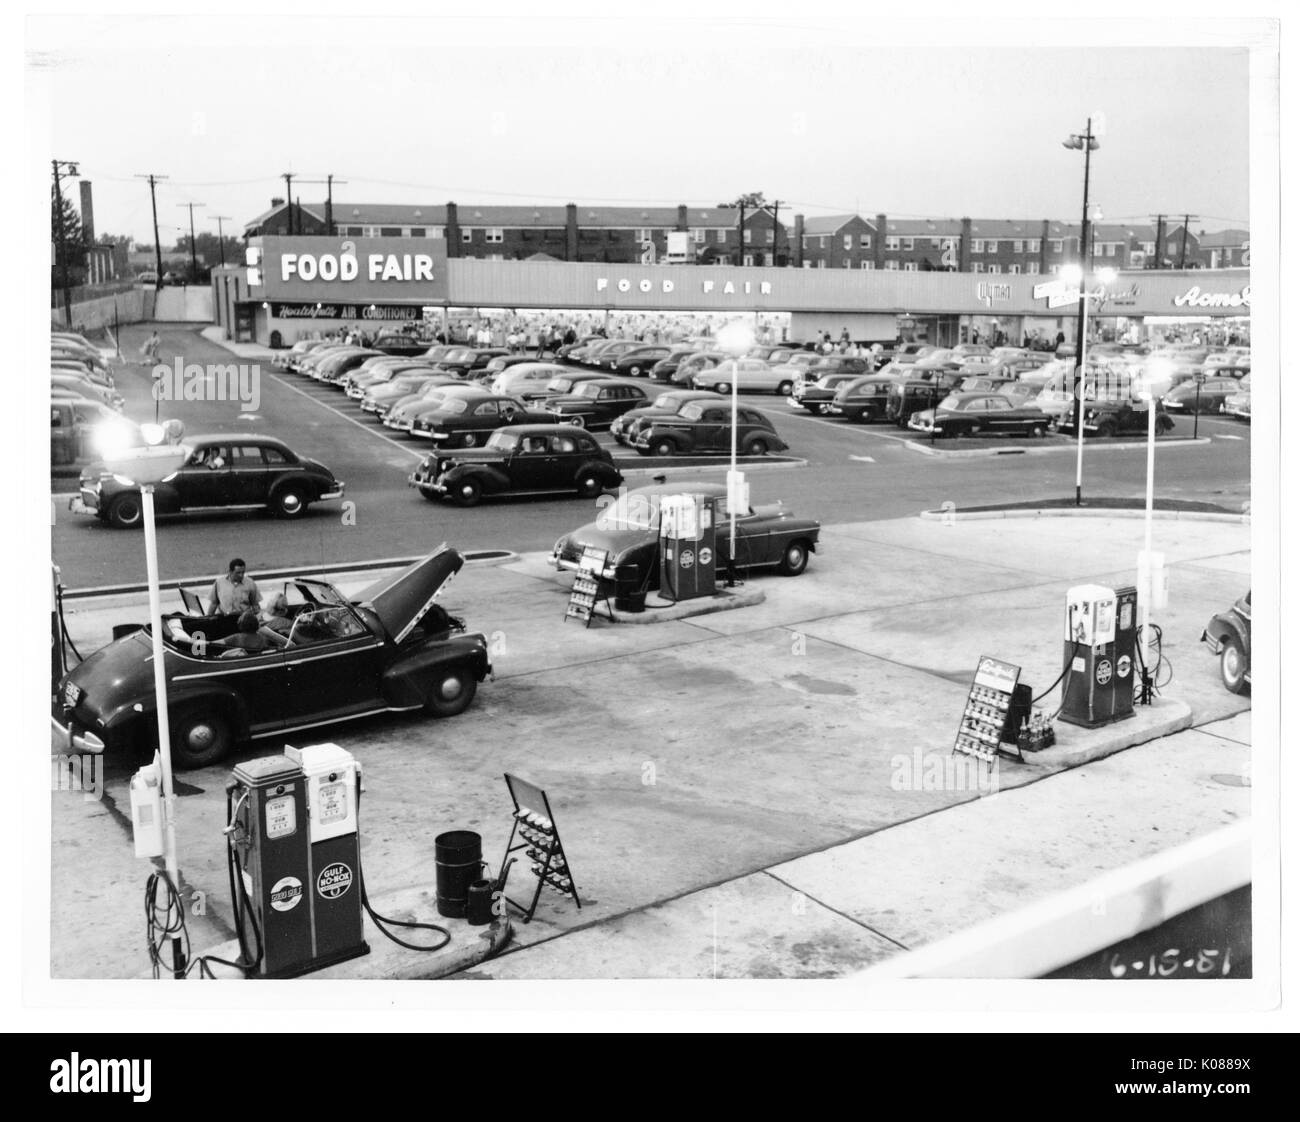 View of a gas station with two of the four pumps connected to cars, behind the gas station is a packed parking lot for the Food Fair store, behind the Food Fair store are row homes, Baltimore, Maryland, 1951. Stock Photo